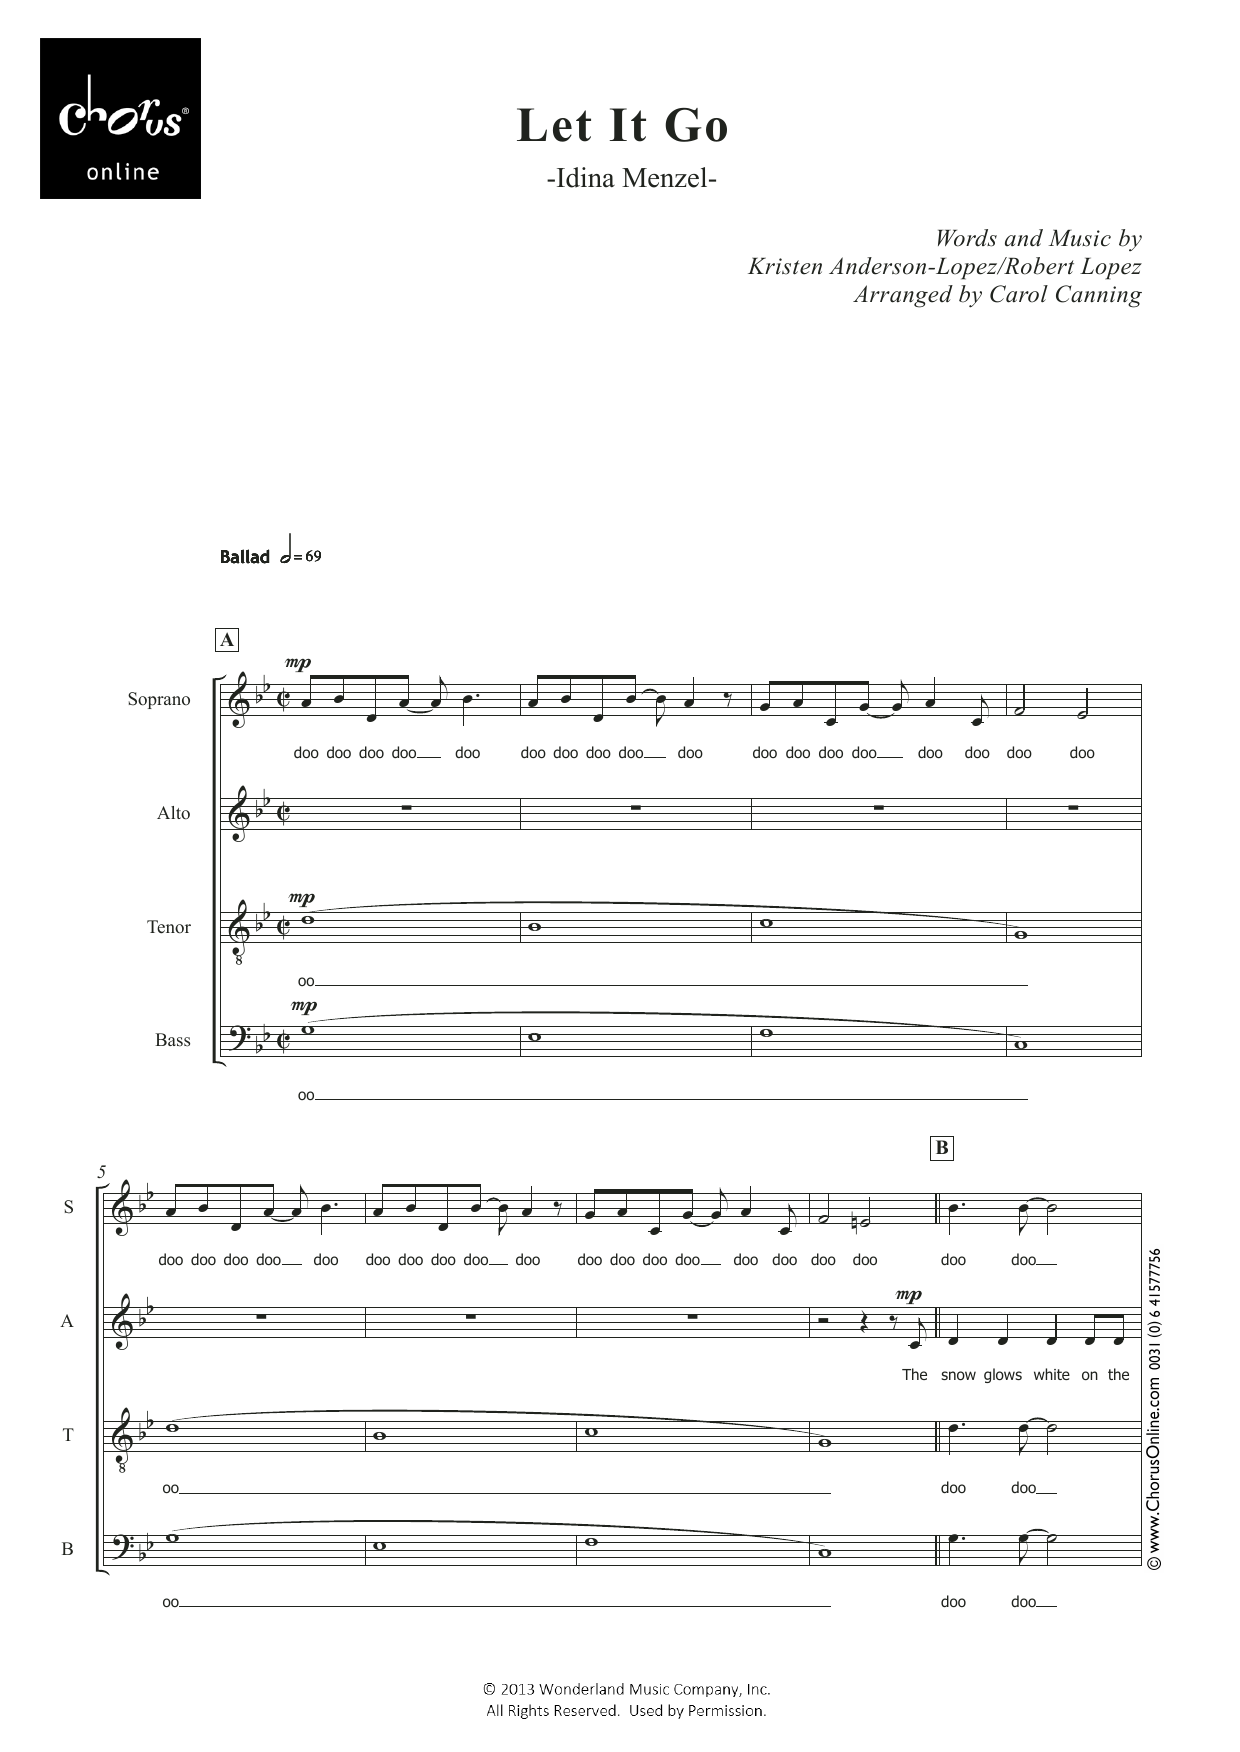 Idina Menzel Let It Go (from Frozen) (arr. Carol Canning) sheet music notes printable PDF score